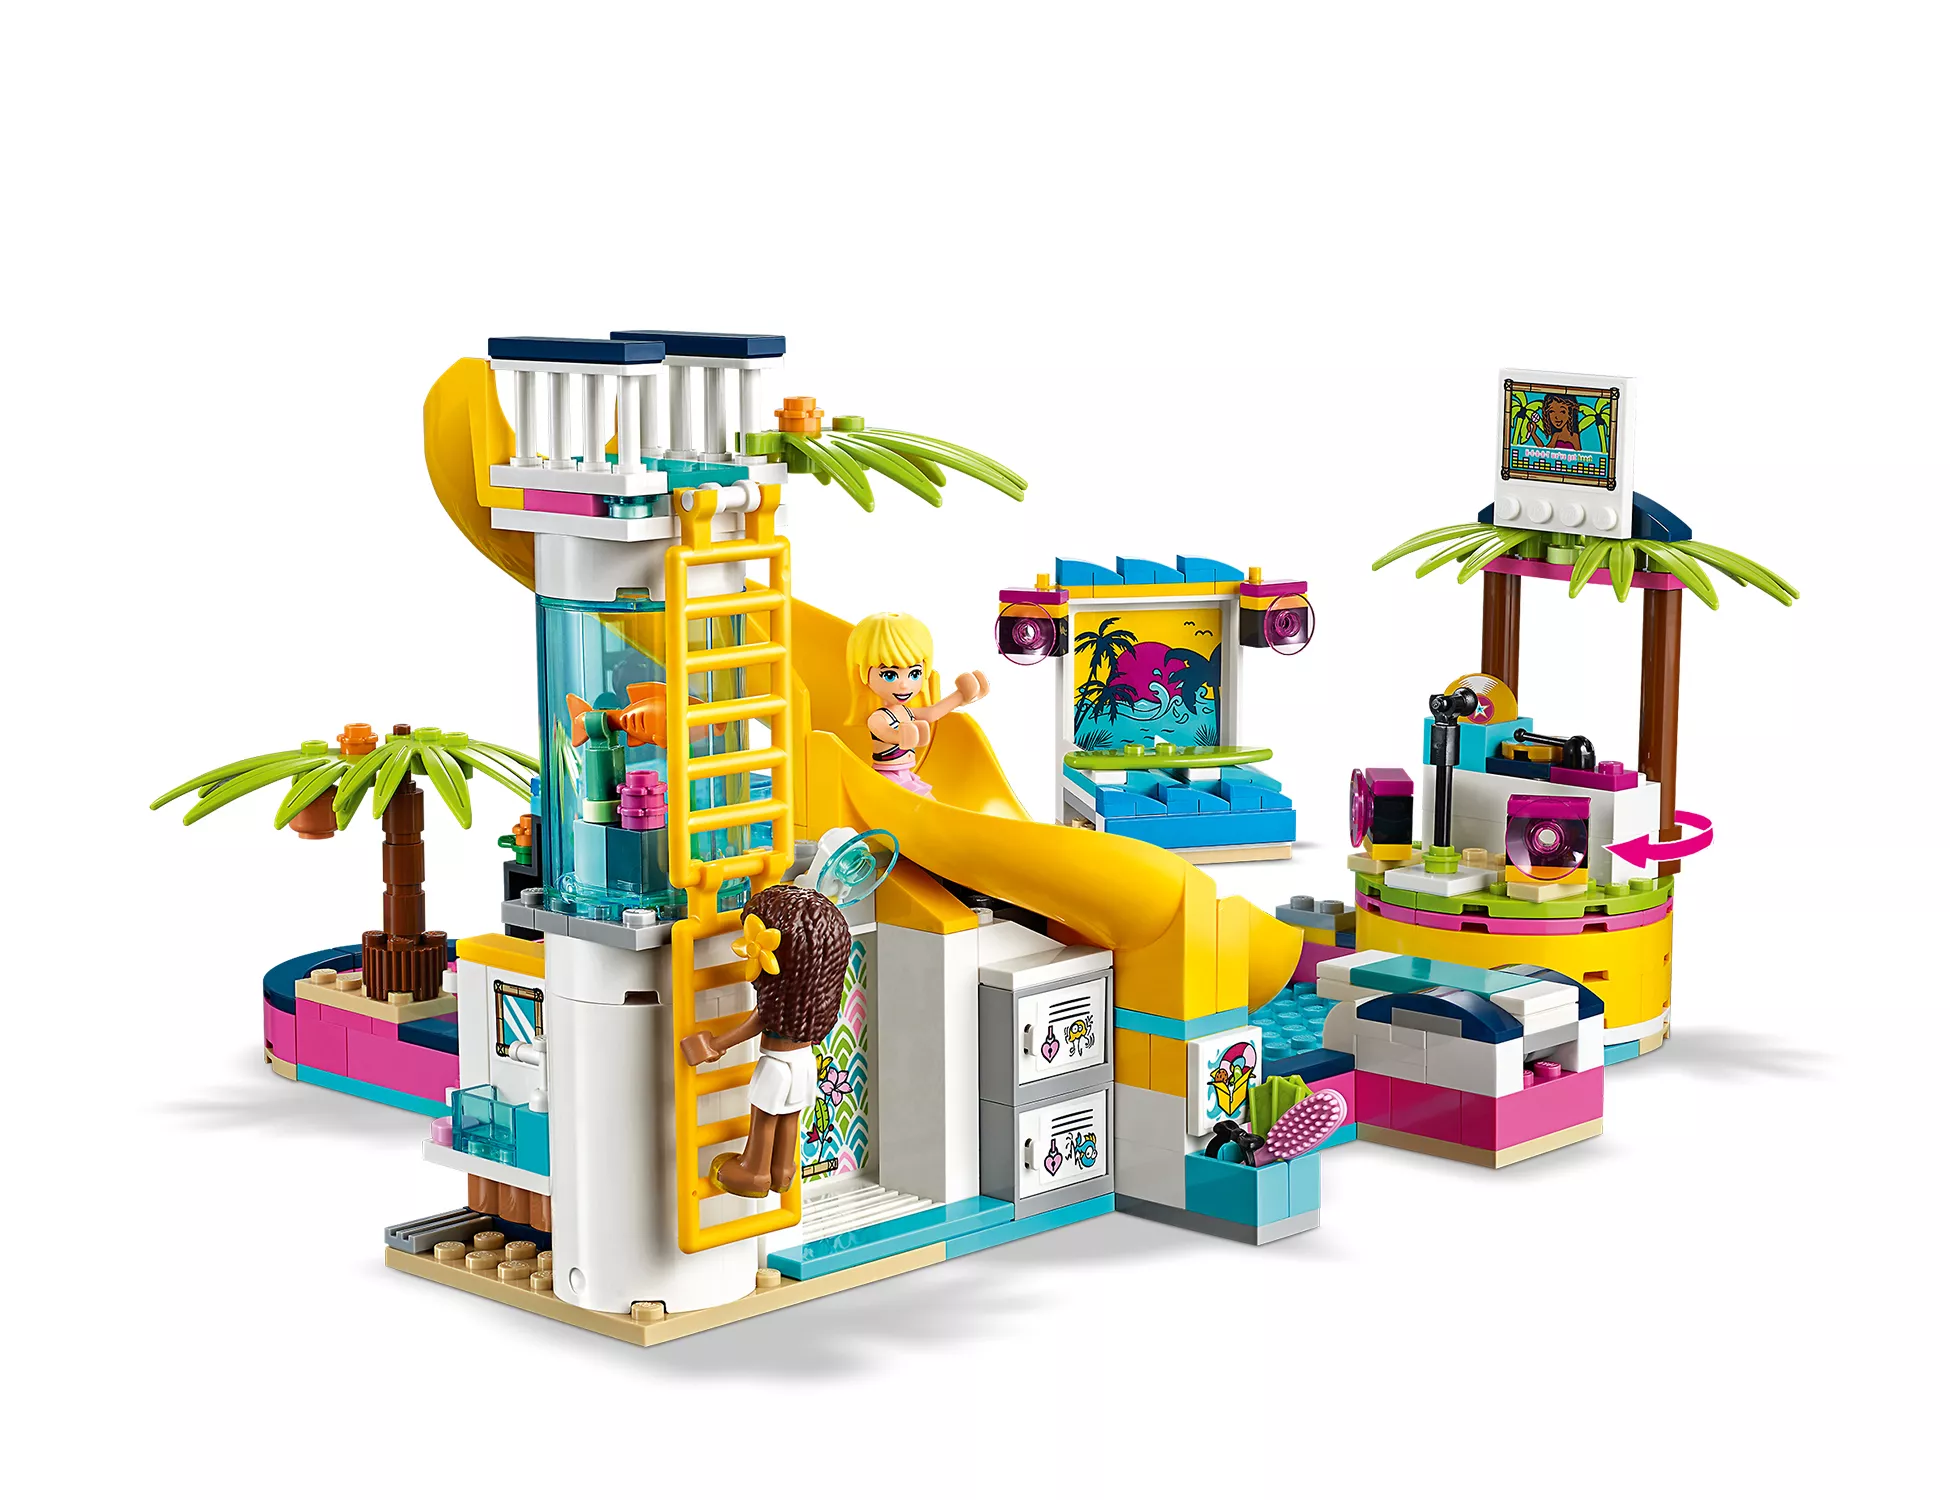 LEGO Friends Andreas Pool-Party - 41374